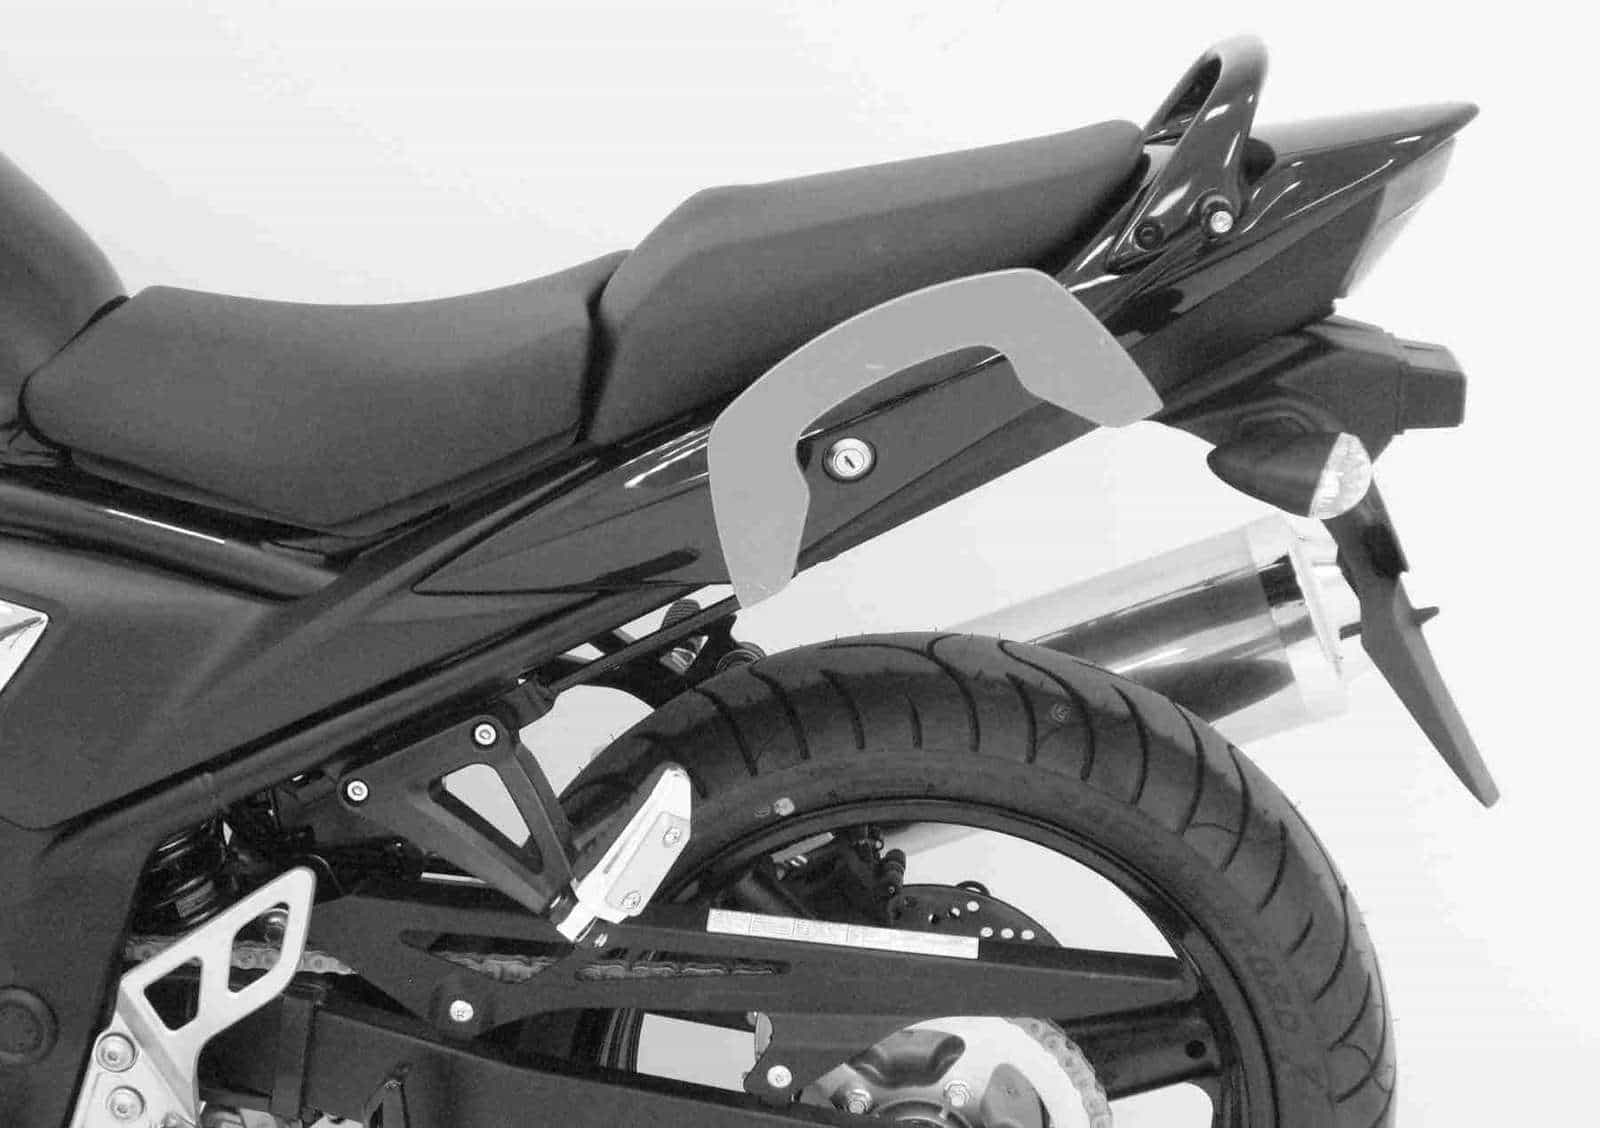 C-Bow sidecarrier for Suzuki GSF 650/S Bandit (2009-2016) / GSF 1250 Bandit ABS (2010-) with black pillion foot rests